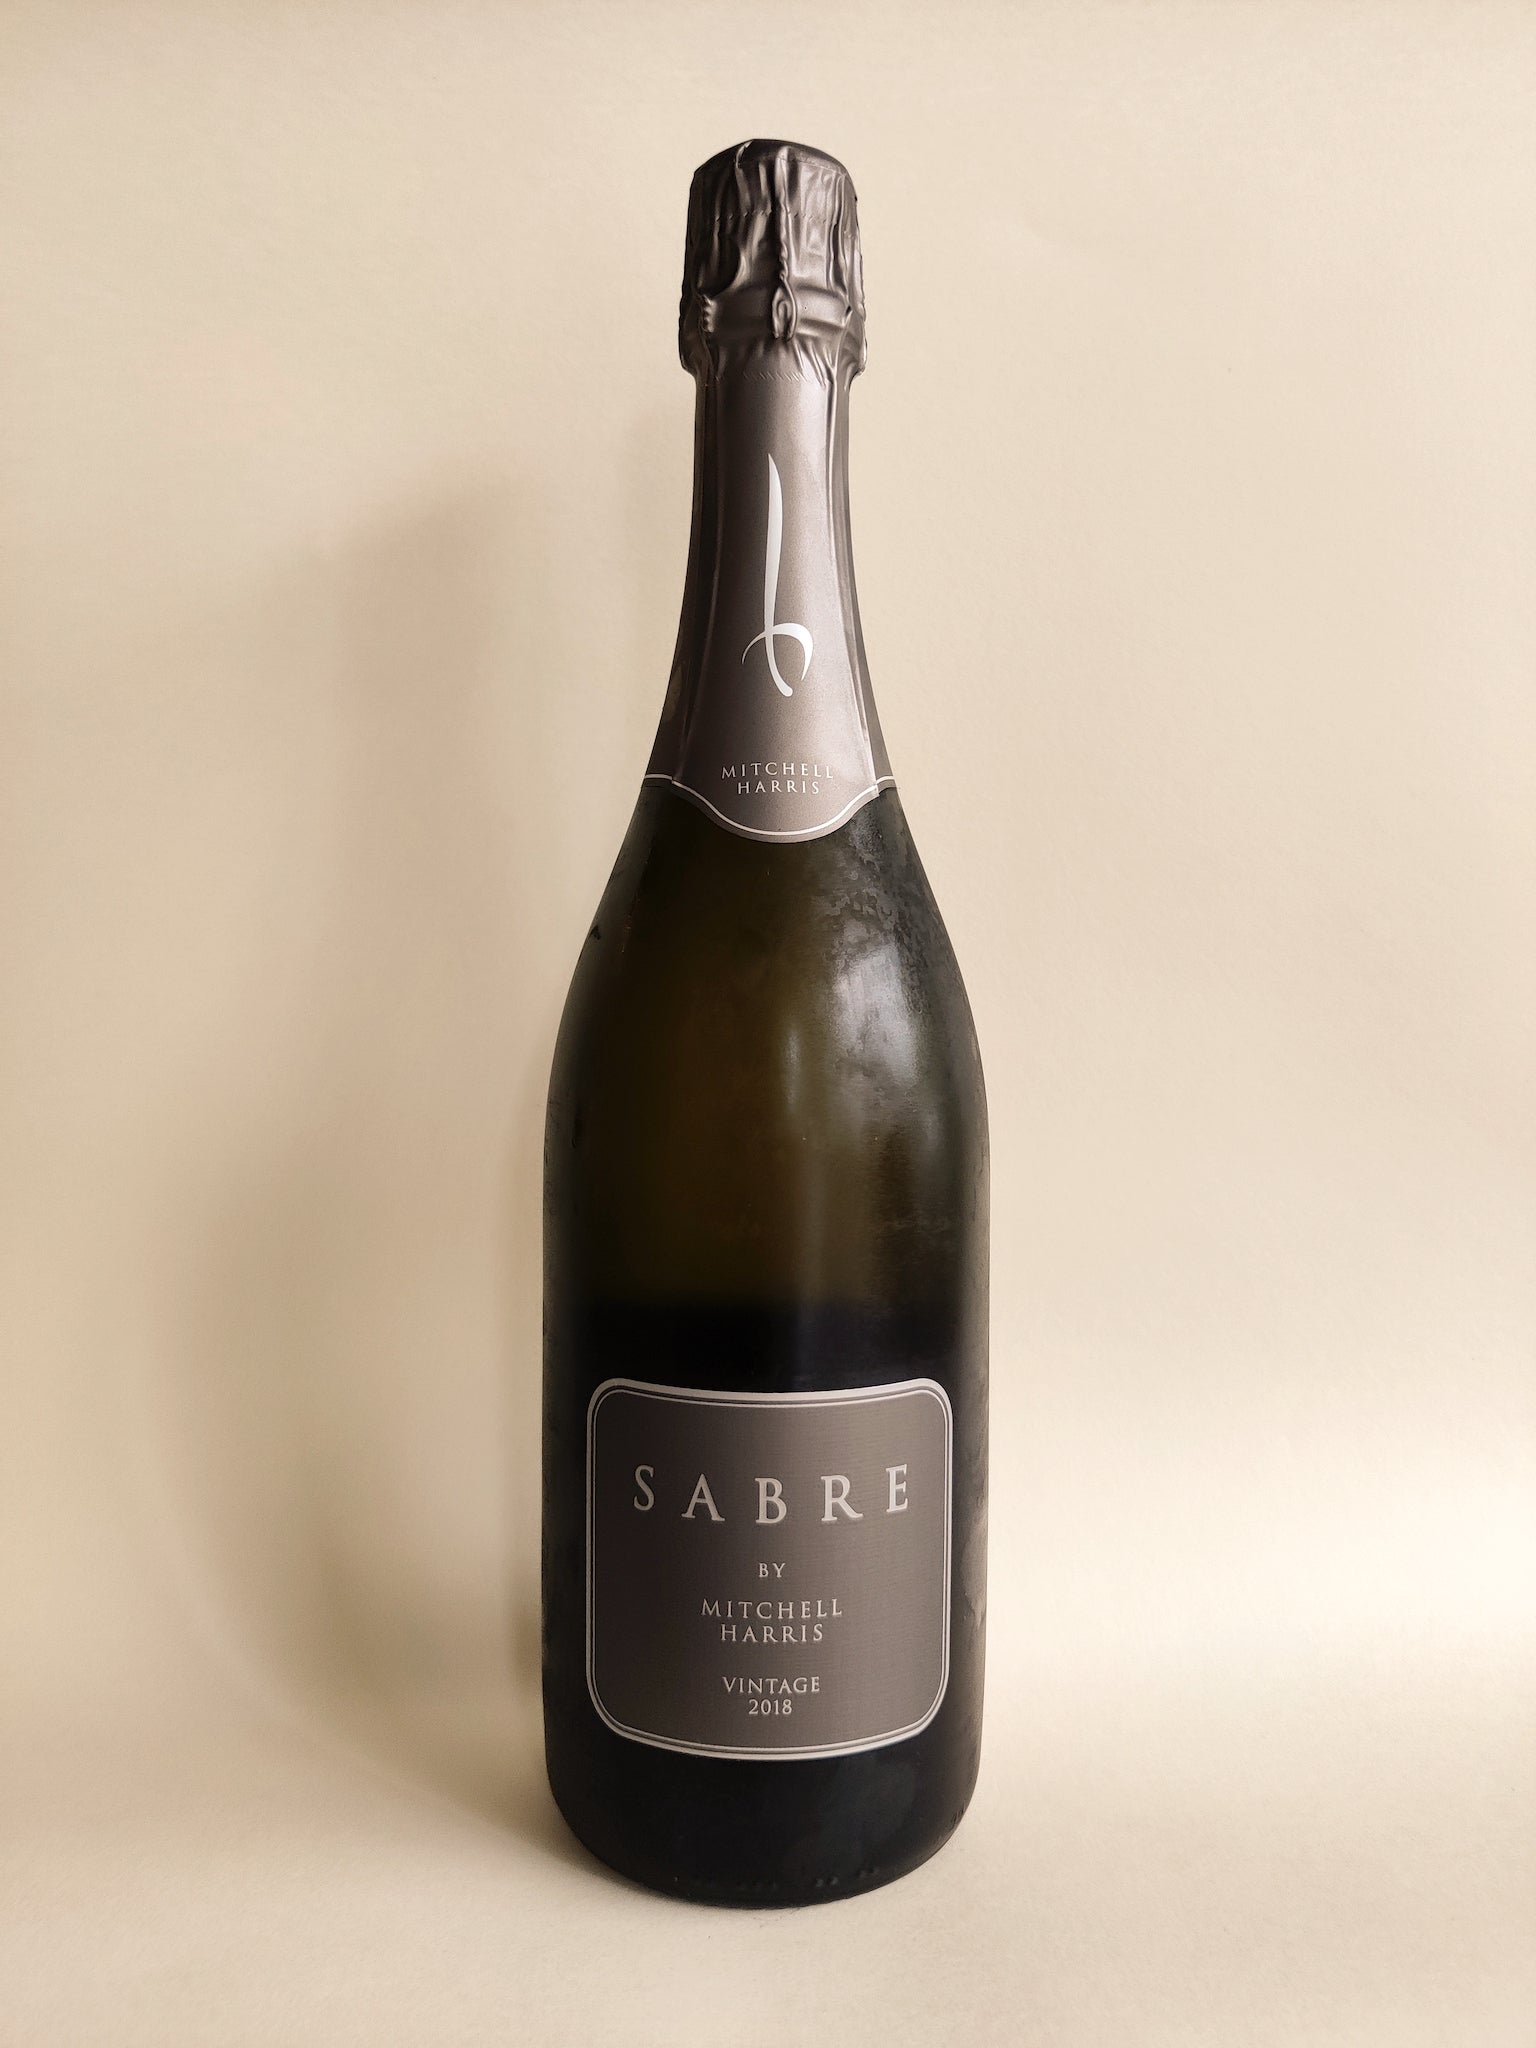 A bottle of 2018 Mitchell-Harris Sabre Sparkling Wine from Victoria.